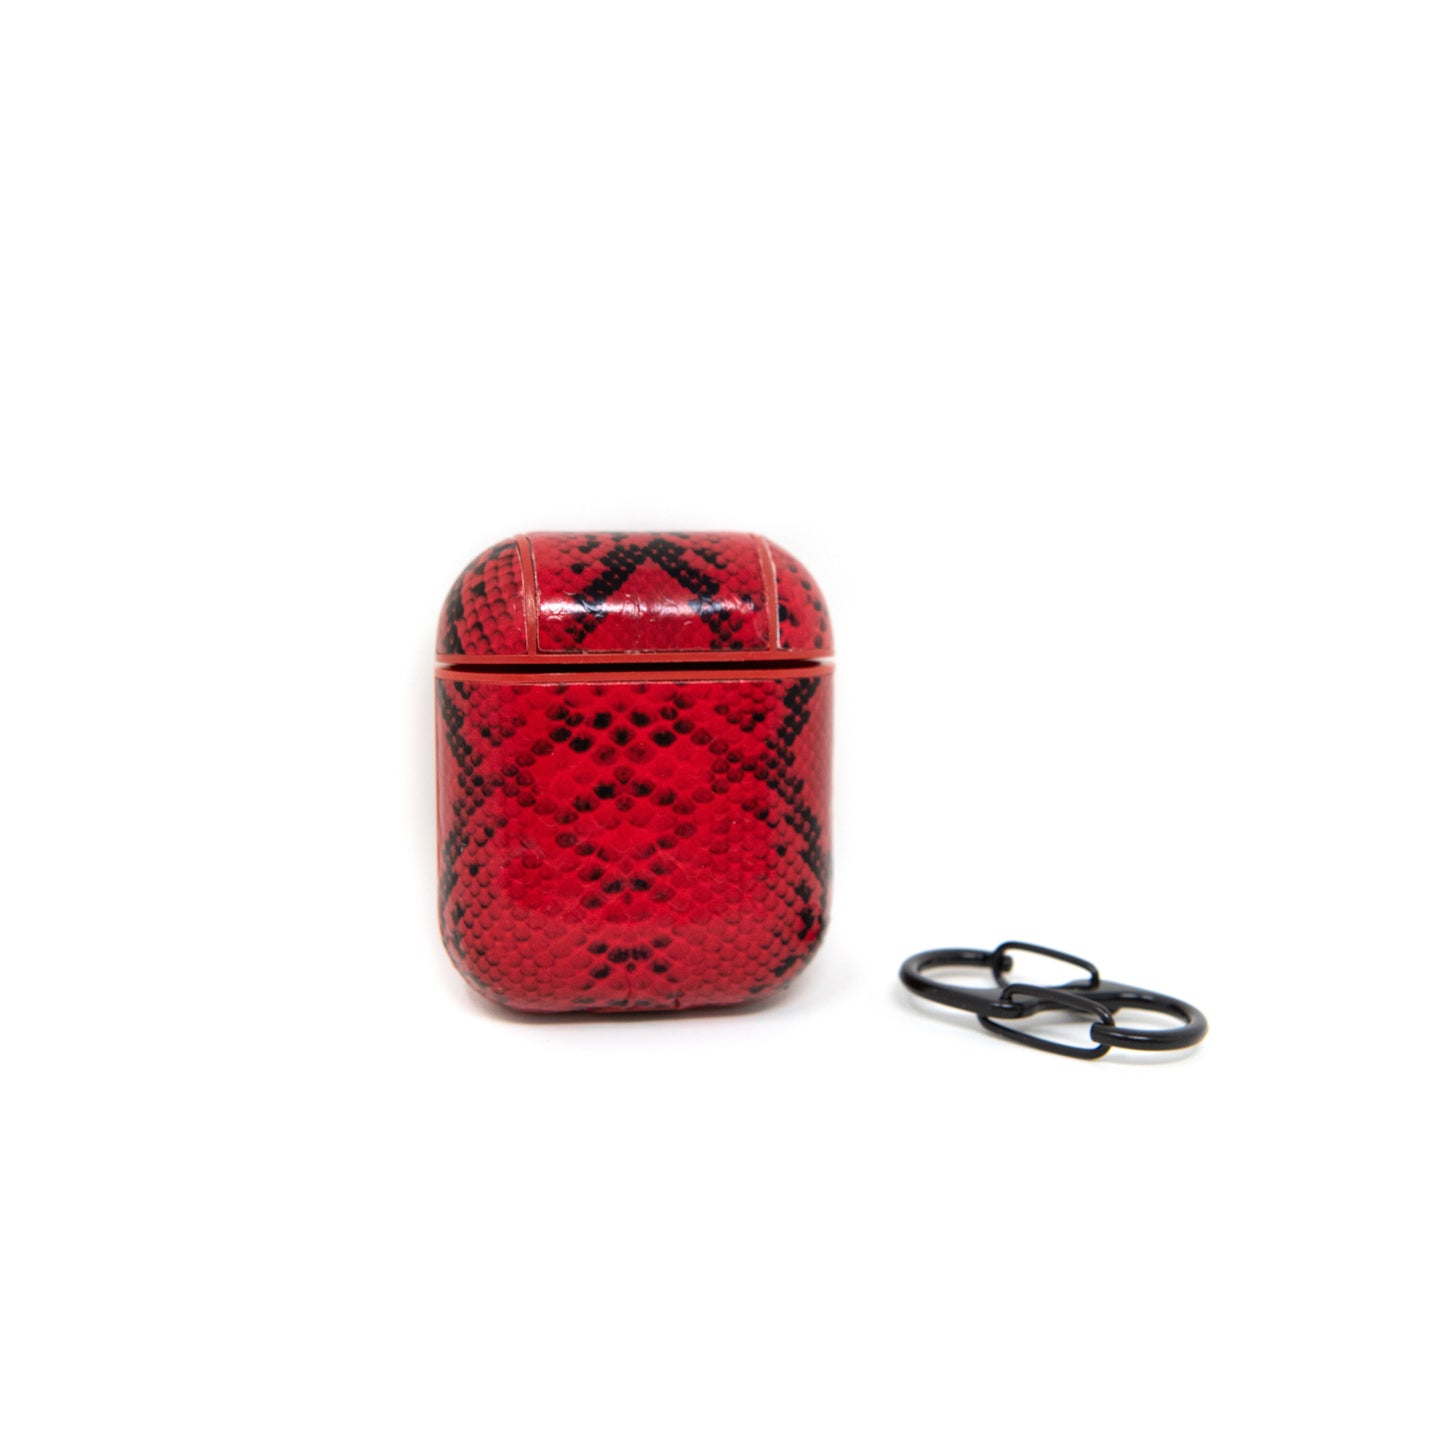 Snakeskin AirPod Cases ACCESSORY The Sis Kiss Red